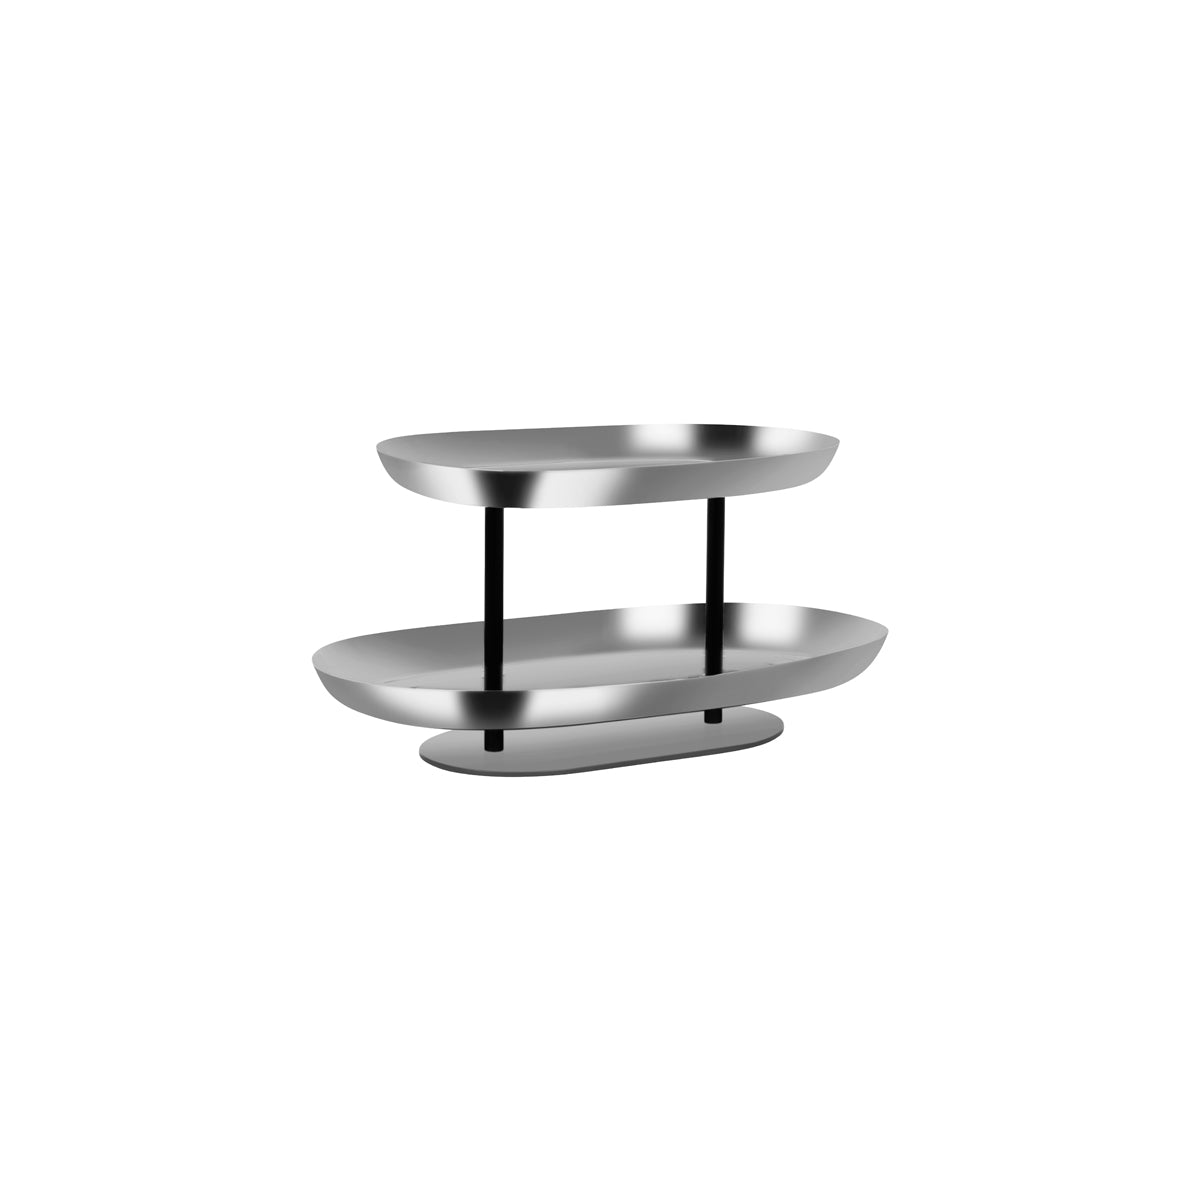 06990 Chef Inox Seafood Stand 2-Tier Stainless Steel / Iron 385x260x195mm Tomkin Australia Hospitality Supplies